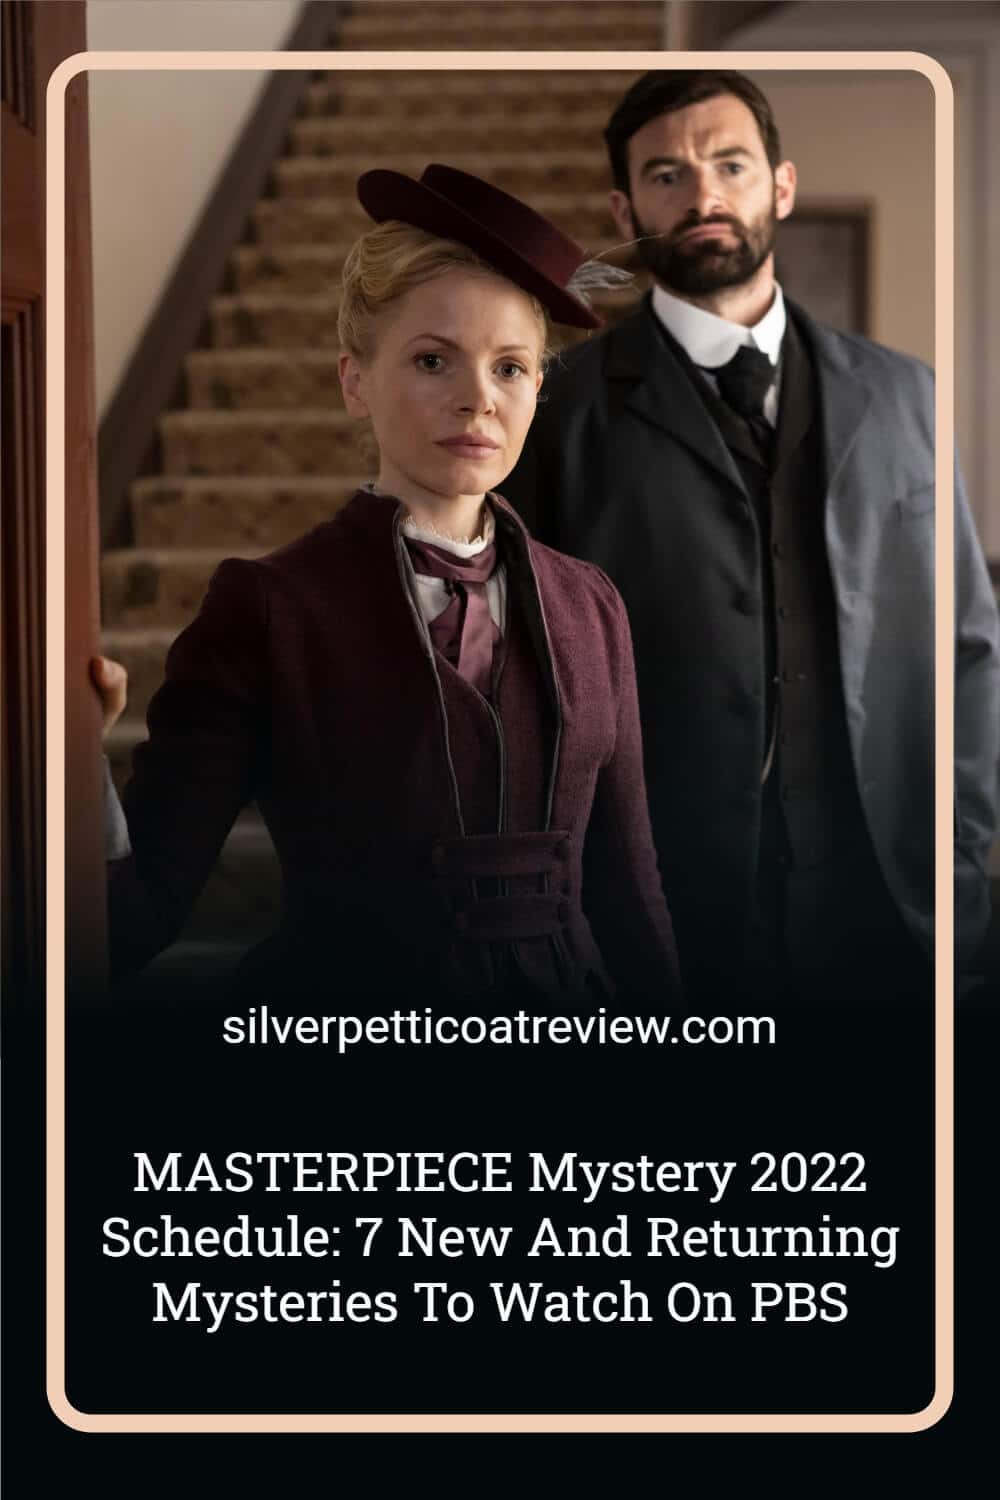 MASTERPIECE Mystery 2022 Schedule 7 New and Returning Mysteries to